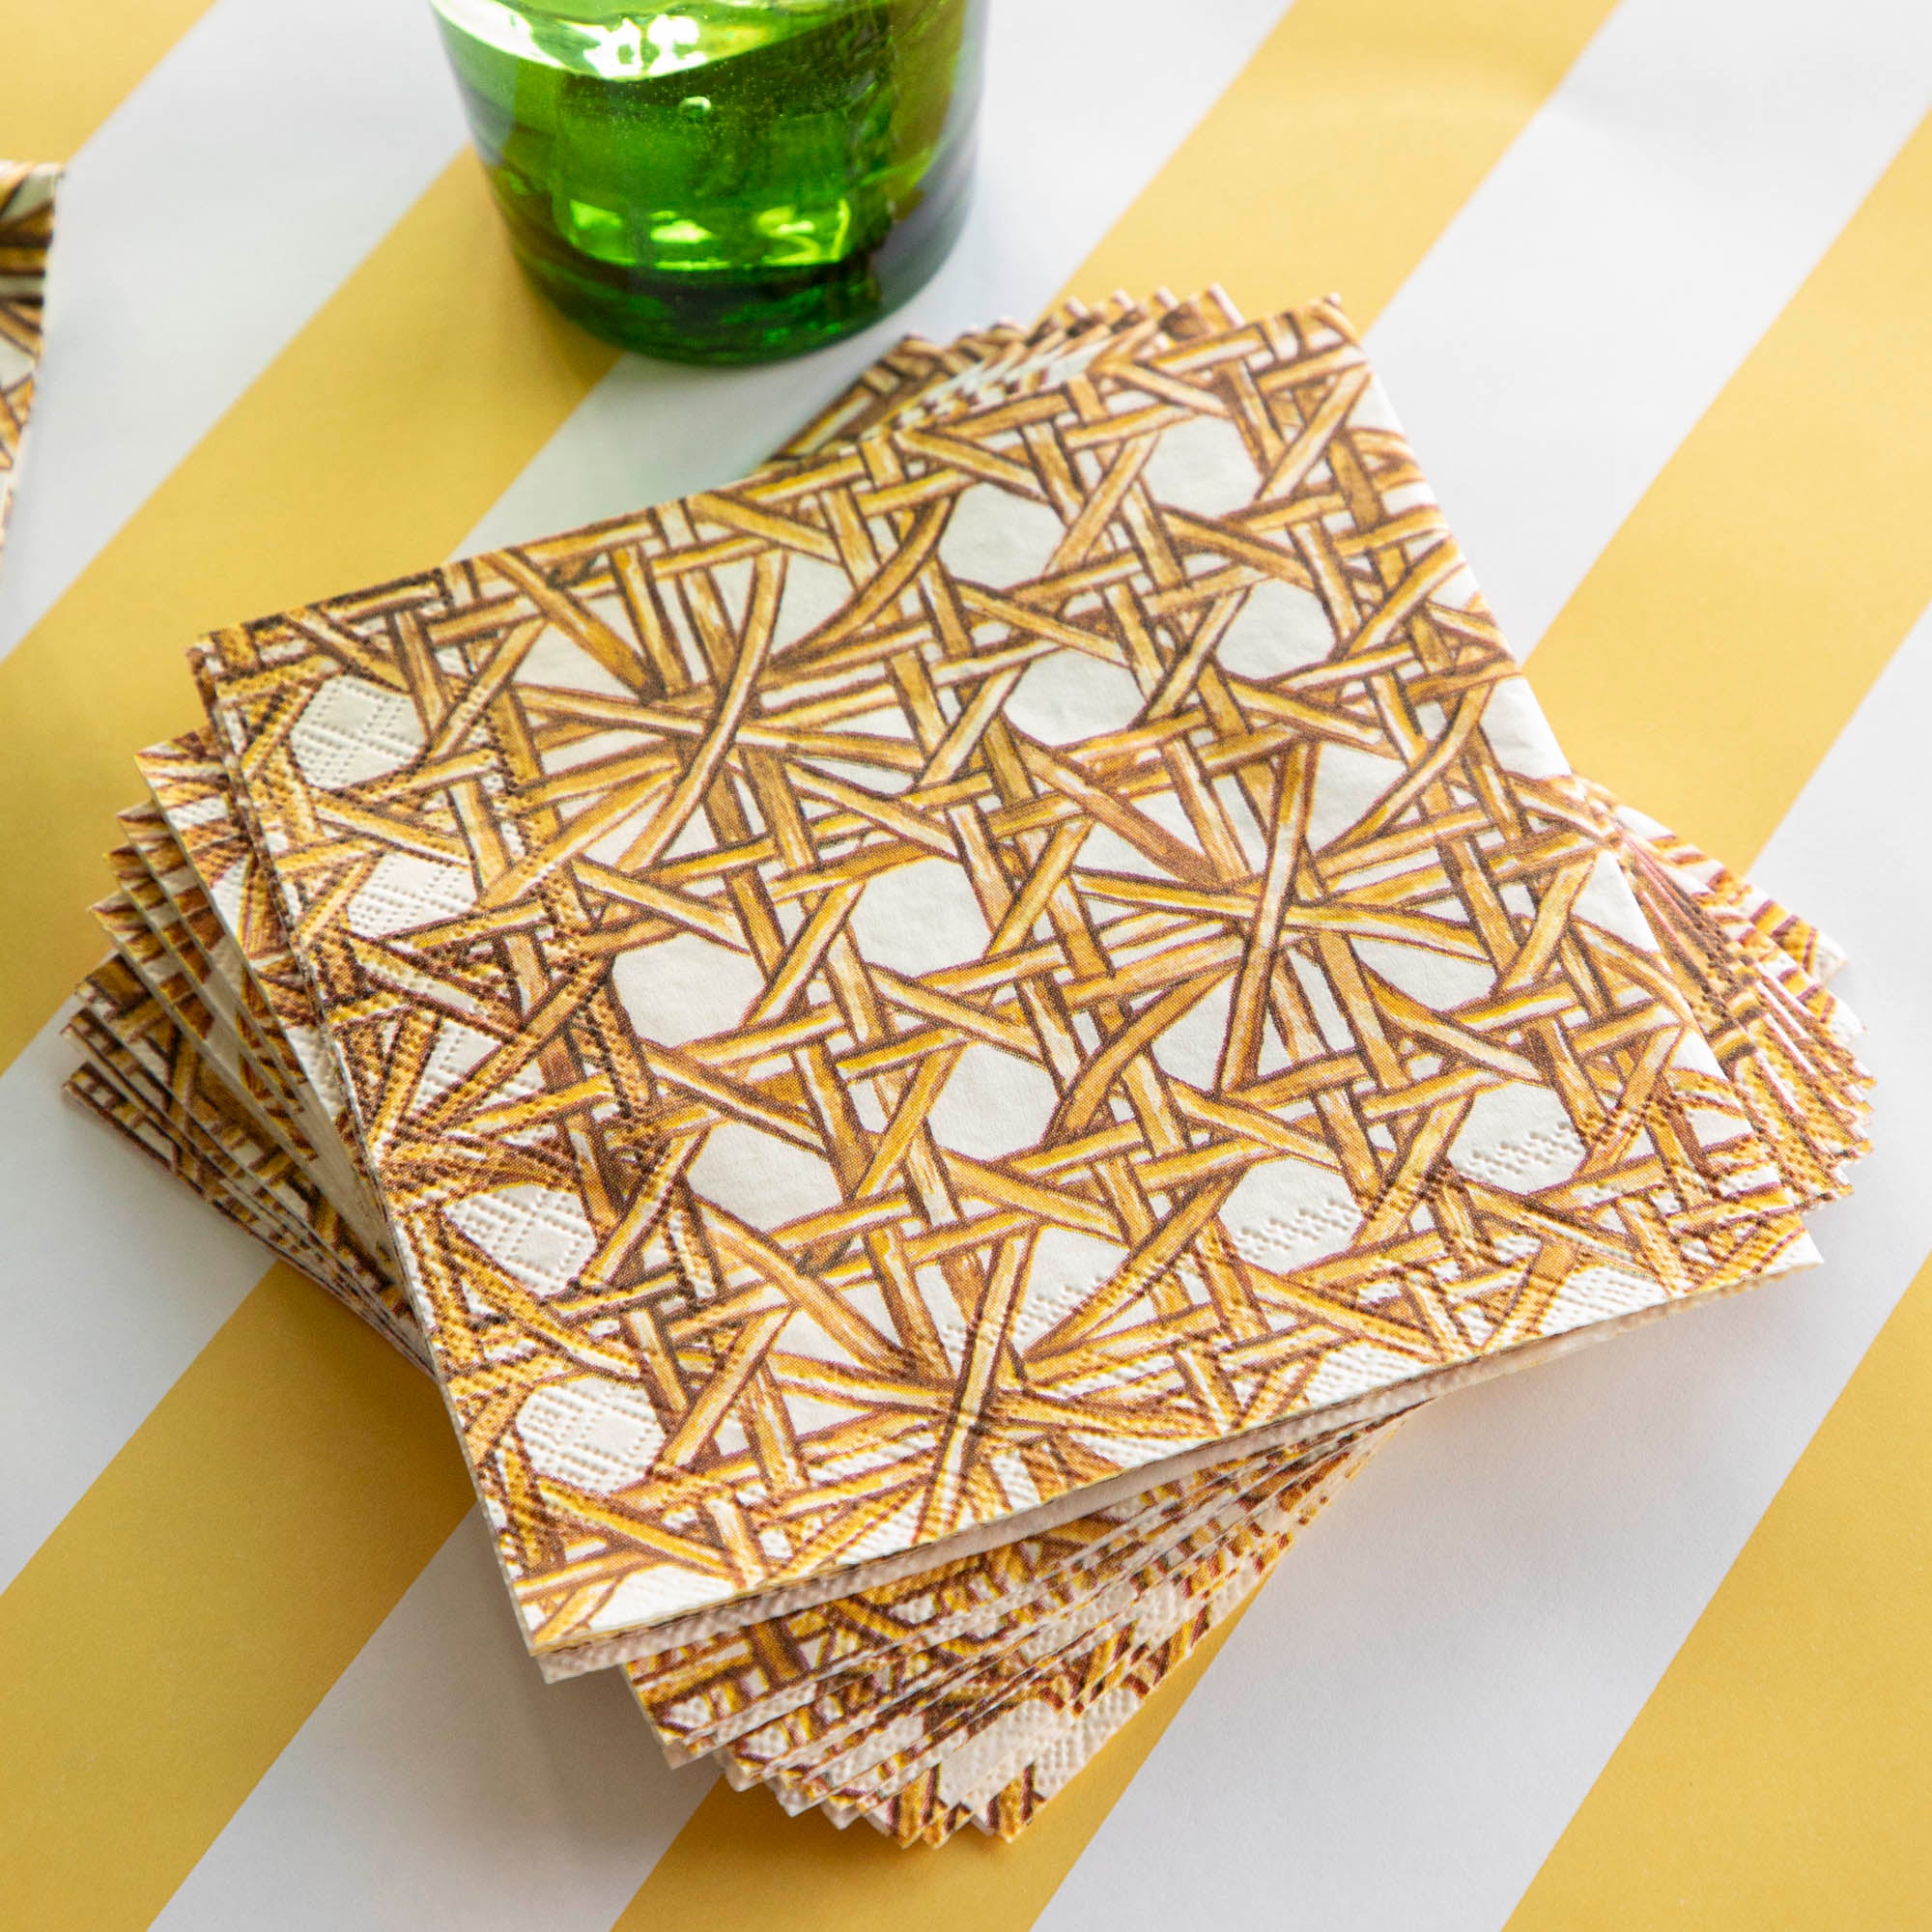 A set of Rattan Weave Napkins from Hester &amp; Cook and a bottle of beer on a yellow and white striped tablecloth, creating a visually appealing tablescape.